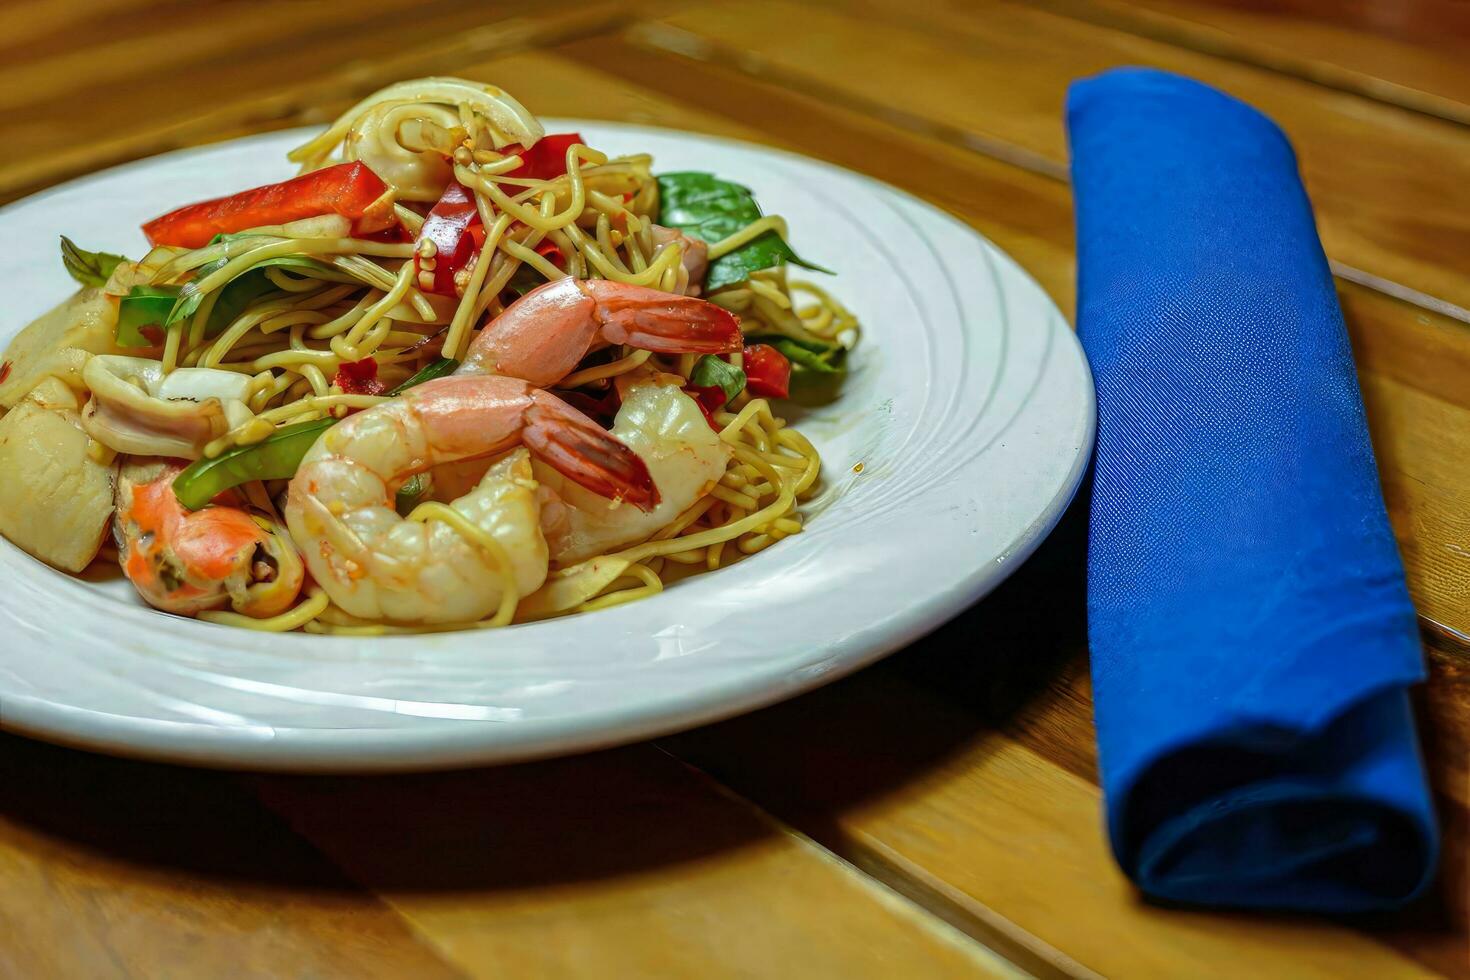 Stir-fried Spaghetti with Seafood, Stir-Fried Pasta with Kra Baow, Stir-Fried Seafood Noodles, Mixed Culture Cuisine photo